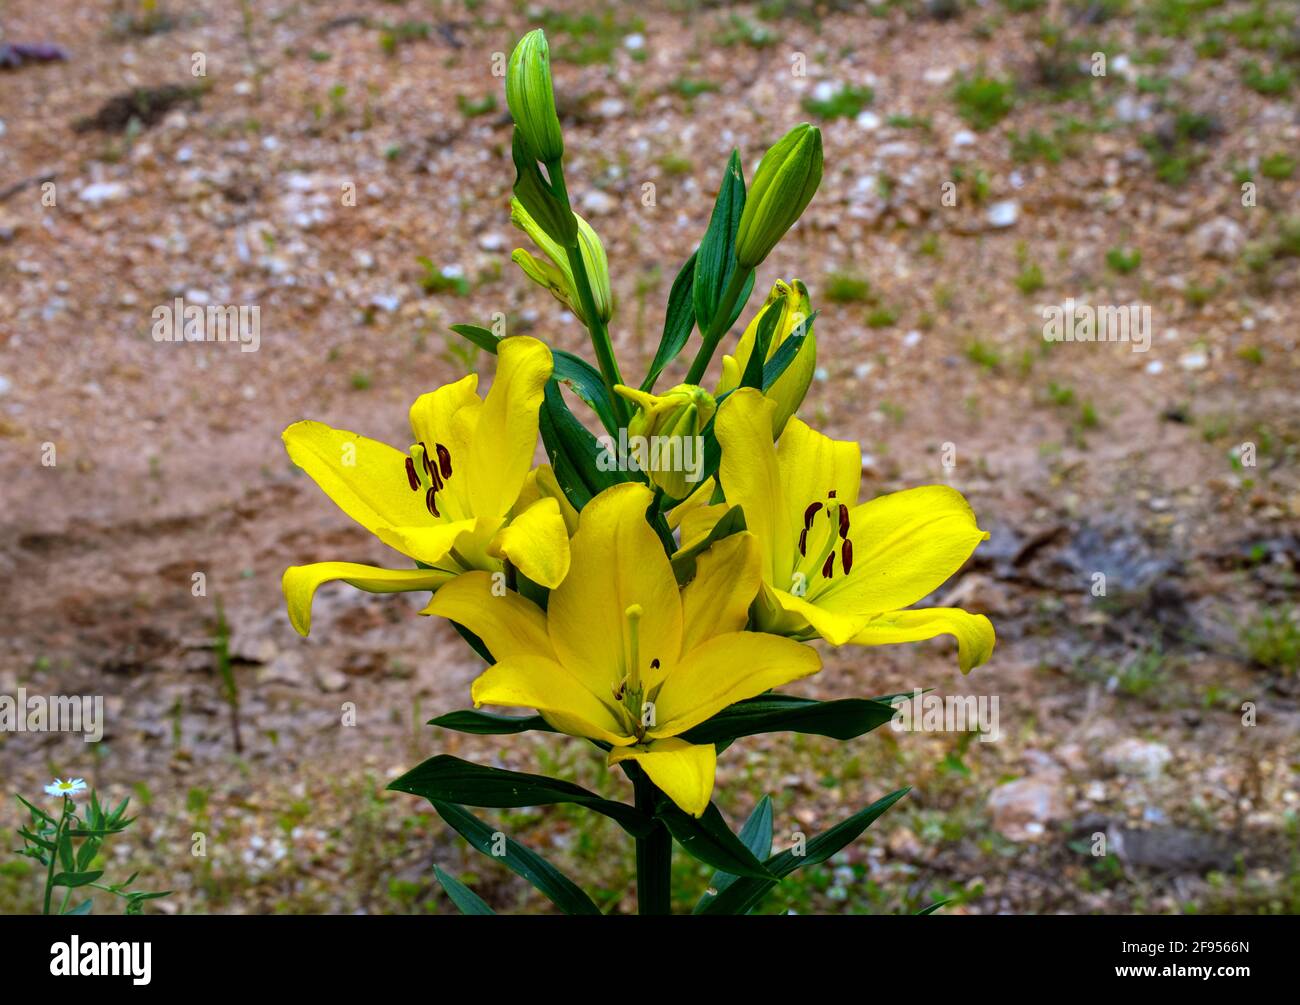 A patch of yellow lilies provide a nice splash of color and brightness to an otherwise drab and dreary ground. Bokeh effect. Stock Photo